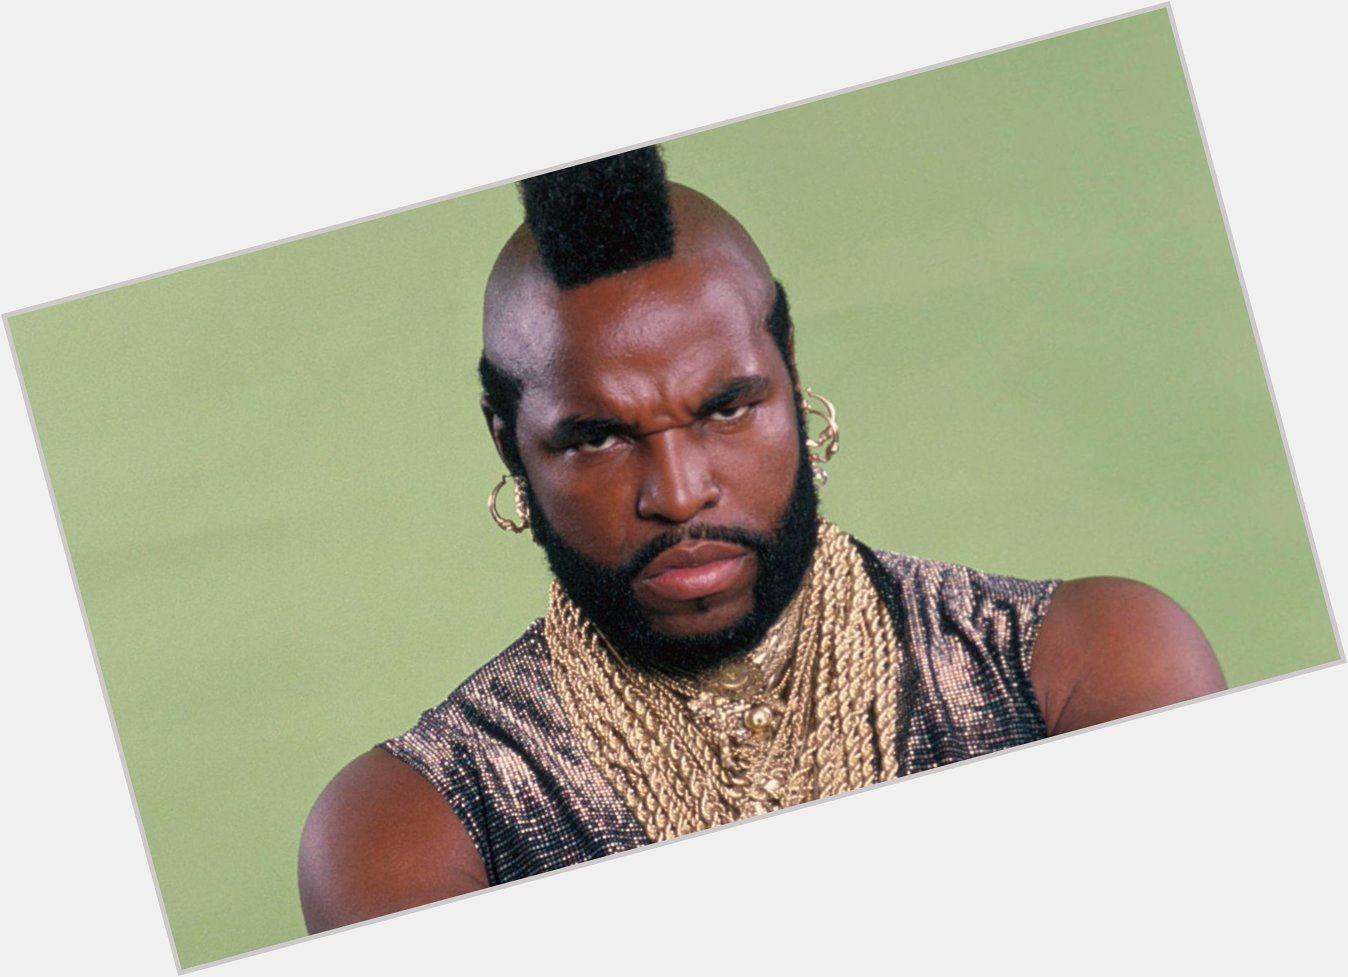 Happy Birthday to Mr T born May 21, 1952 - 65 years old     